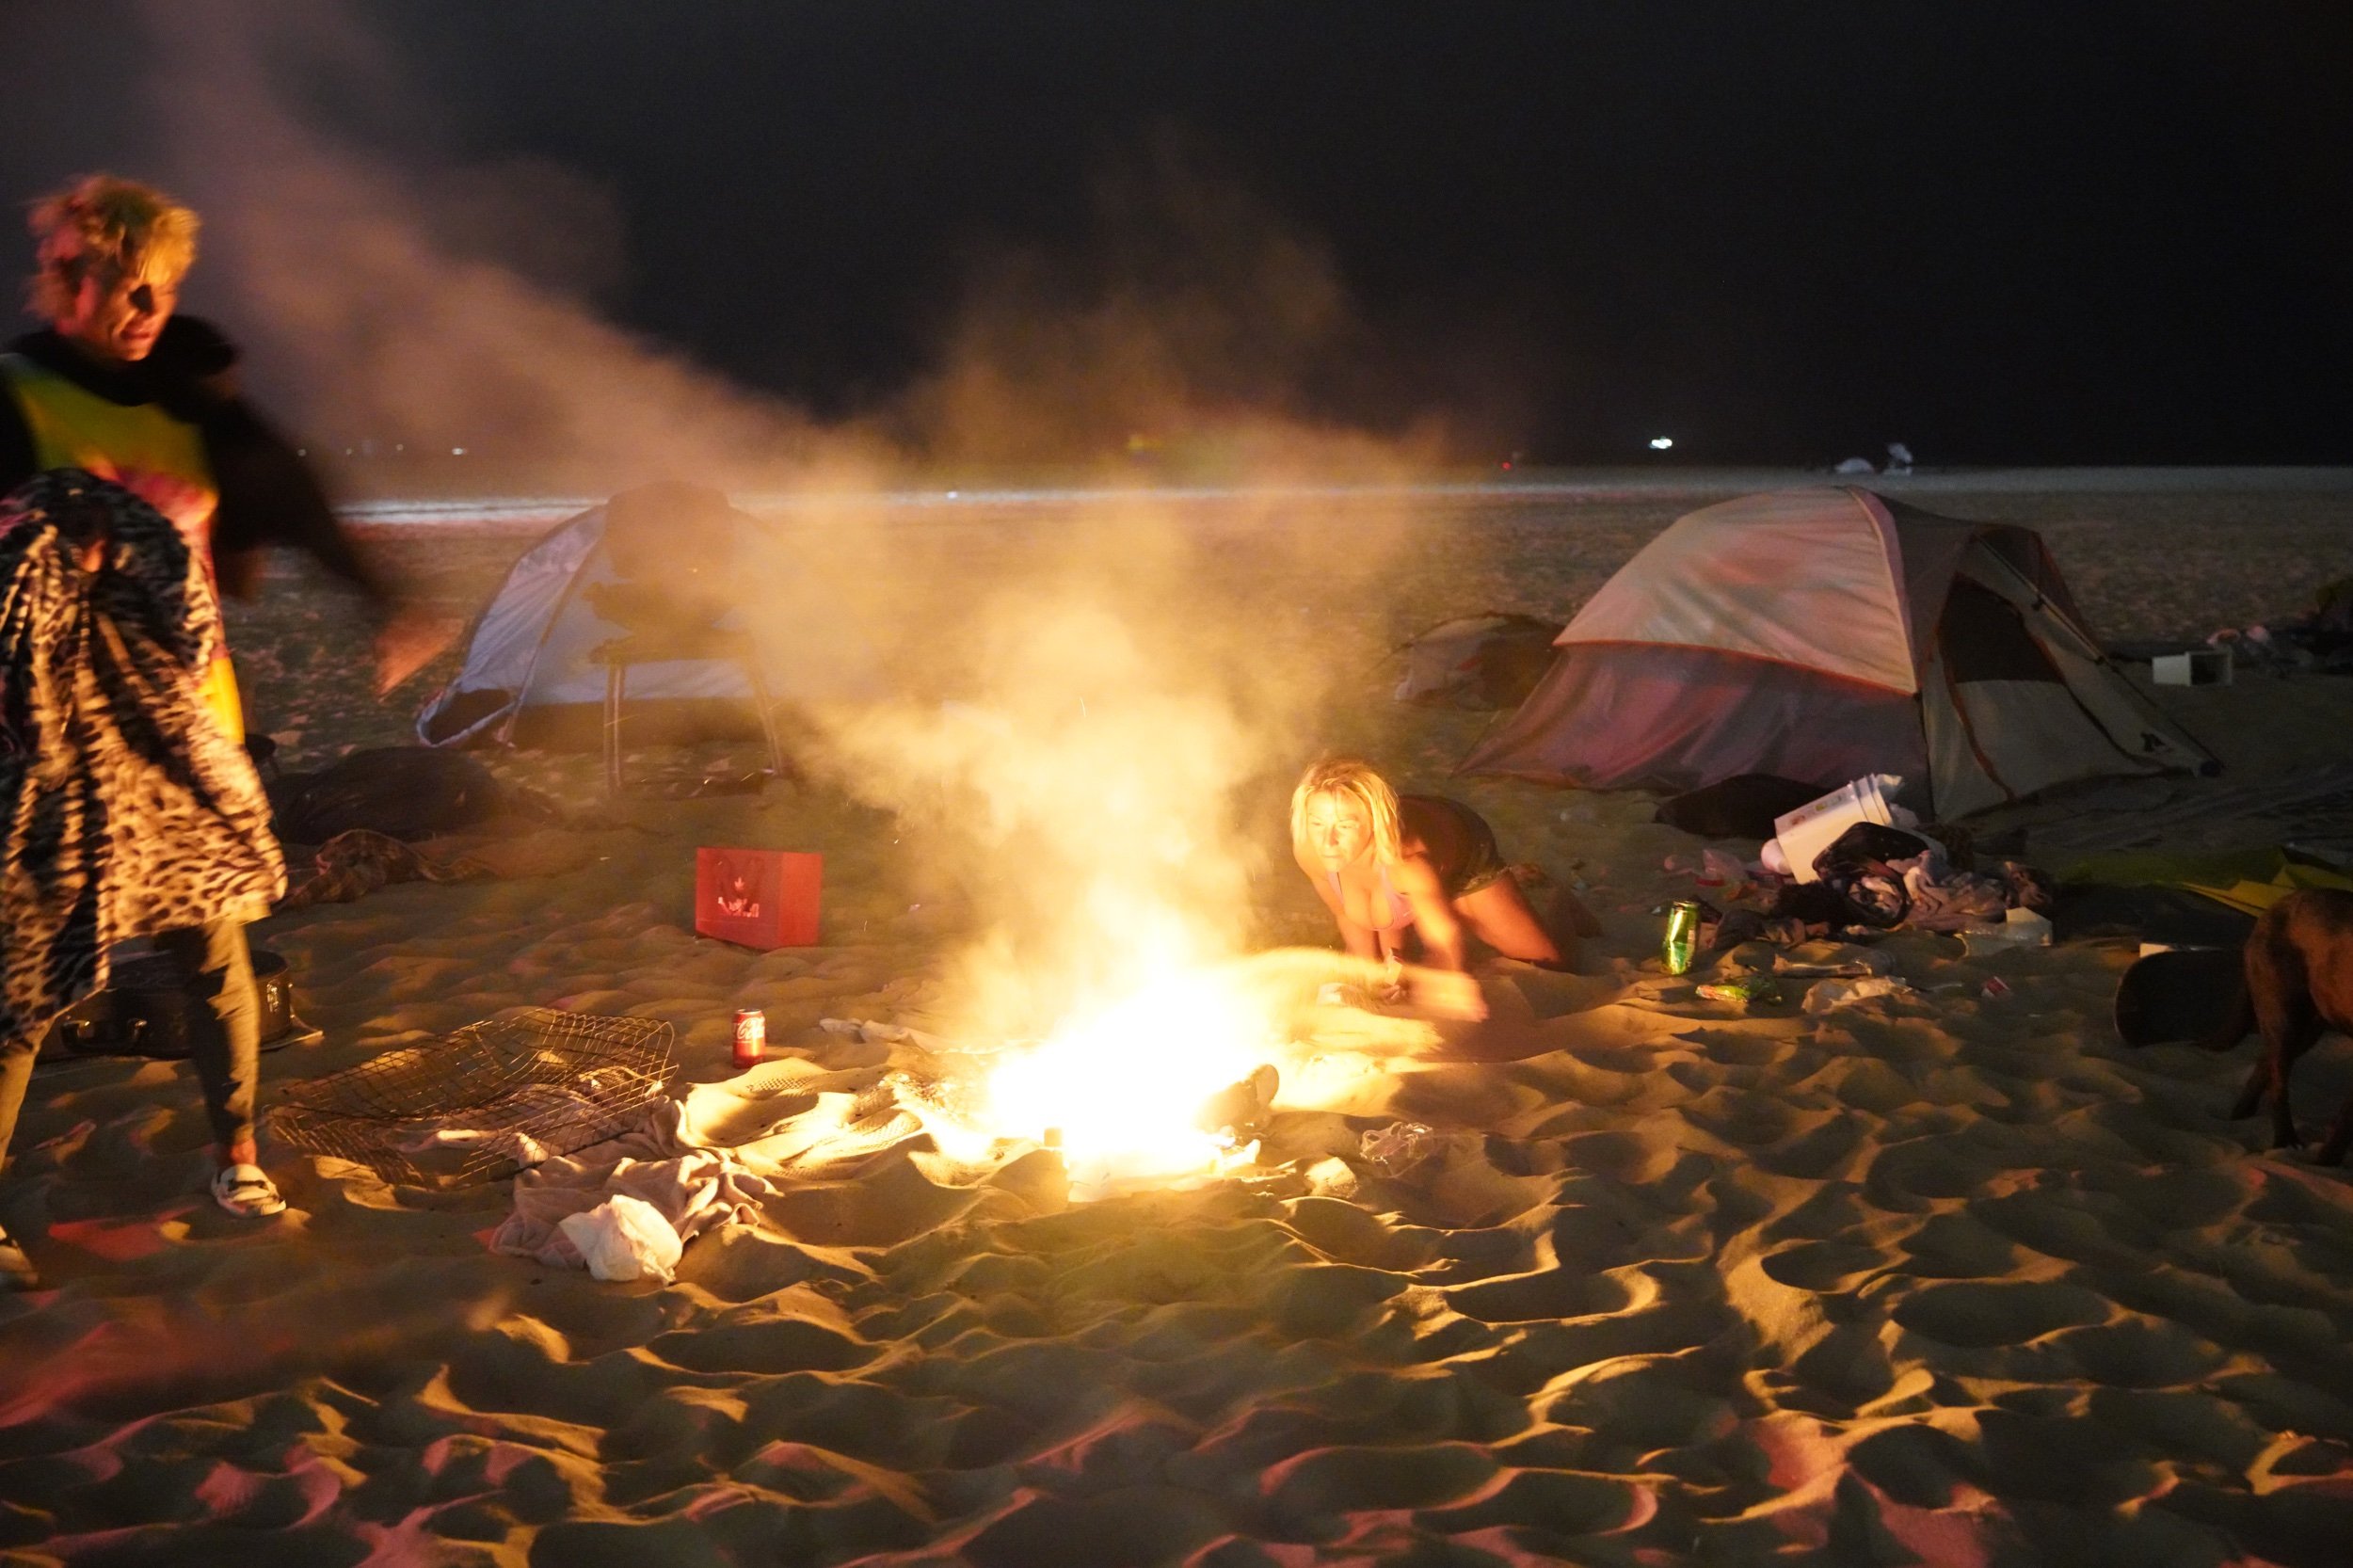  Unhoused residents of the beach quickly work to put out an illegal fire, as police and fire vehicles approach. During the summer of 2021, the city of Los Angeles was sweeping the unhoused off of Venice Beach. Los Angeles, CA. August 2021.  